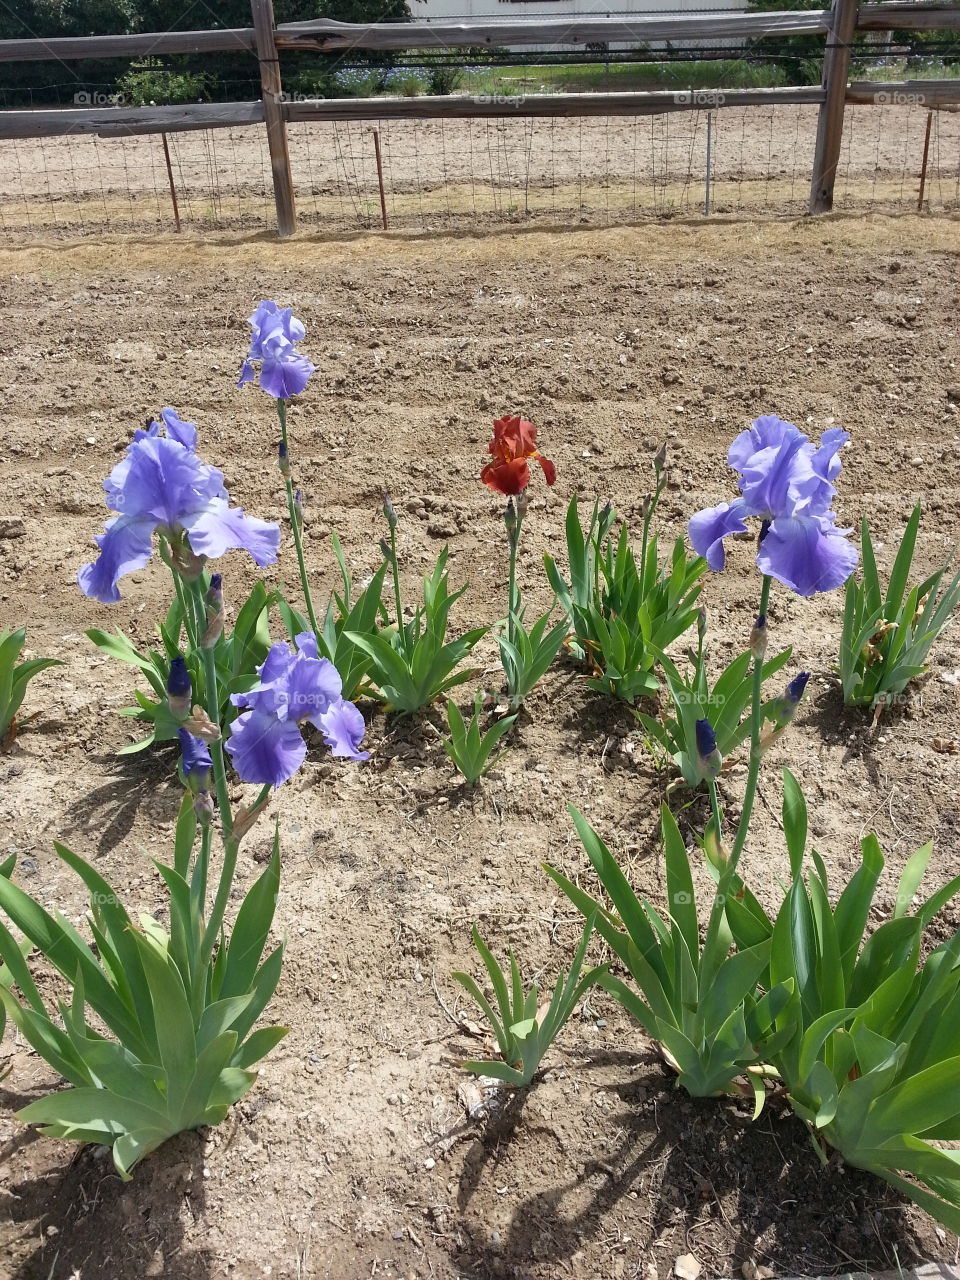 One red flower. One red iris in a bed of blue